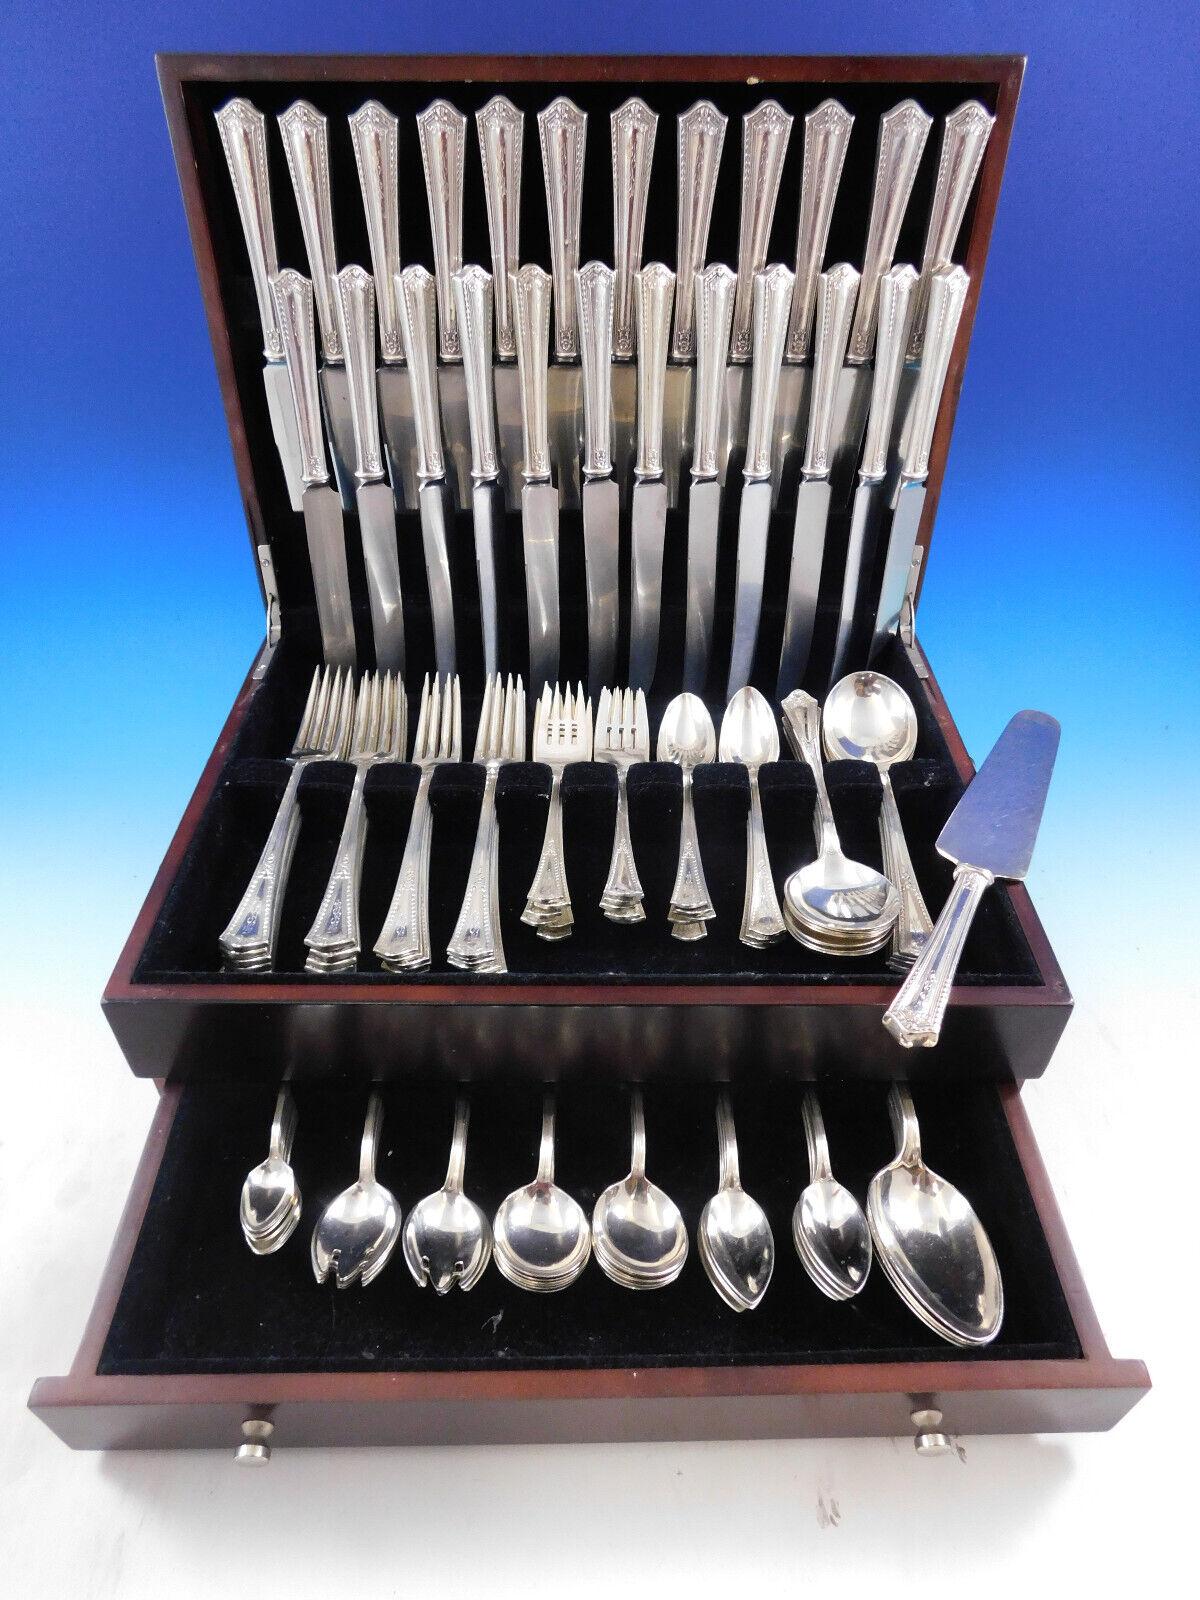 Monumental Chesterfield by Gorham, circa 1914, sterling silver Flatware set - 136 pieces. This set includes:

12 Dinner Size Knives, 9 7/8